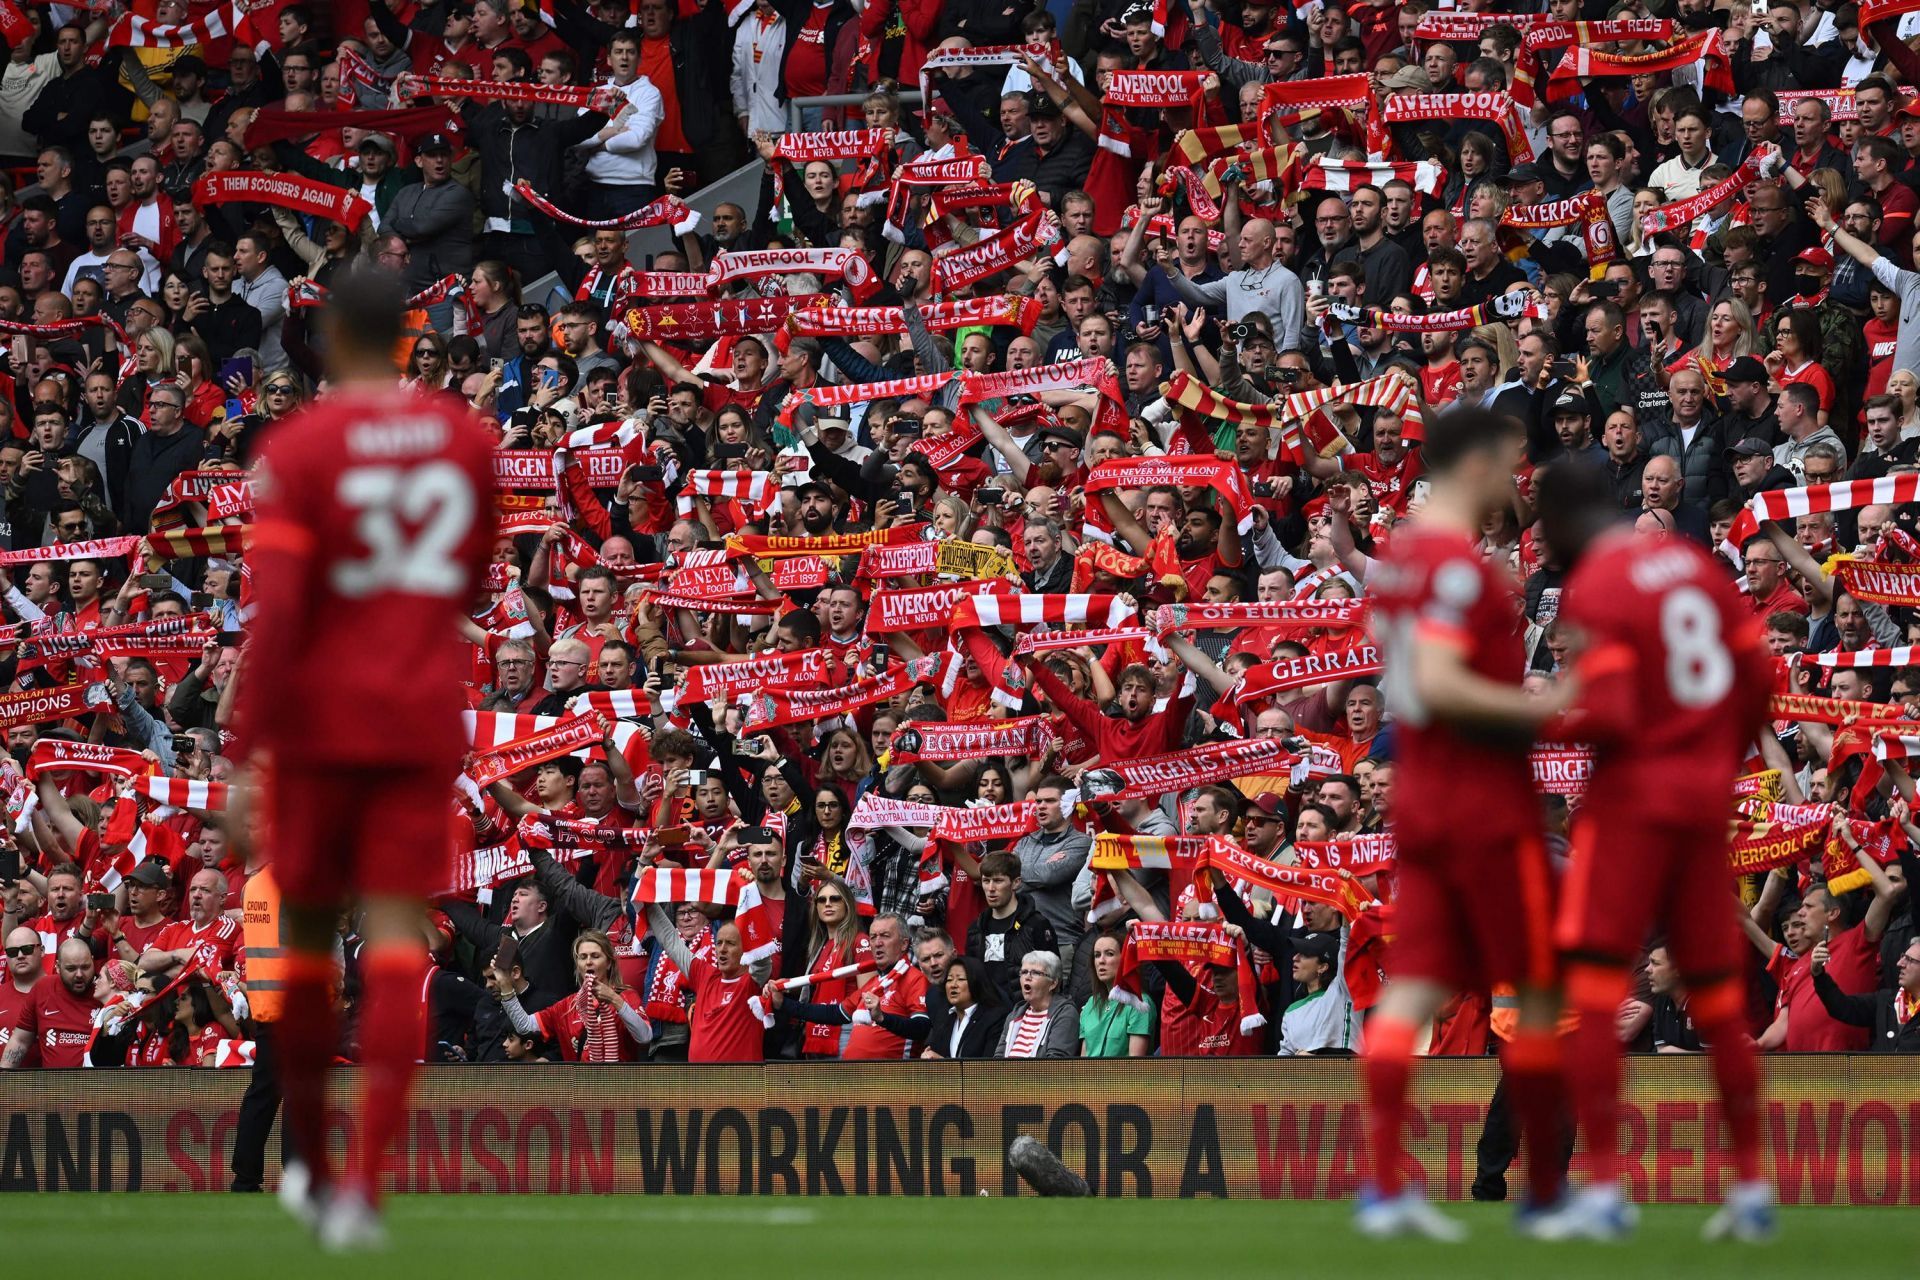 Liverpool players reconcile on the final Premier League matchday as fans watch on